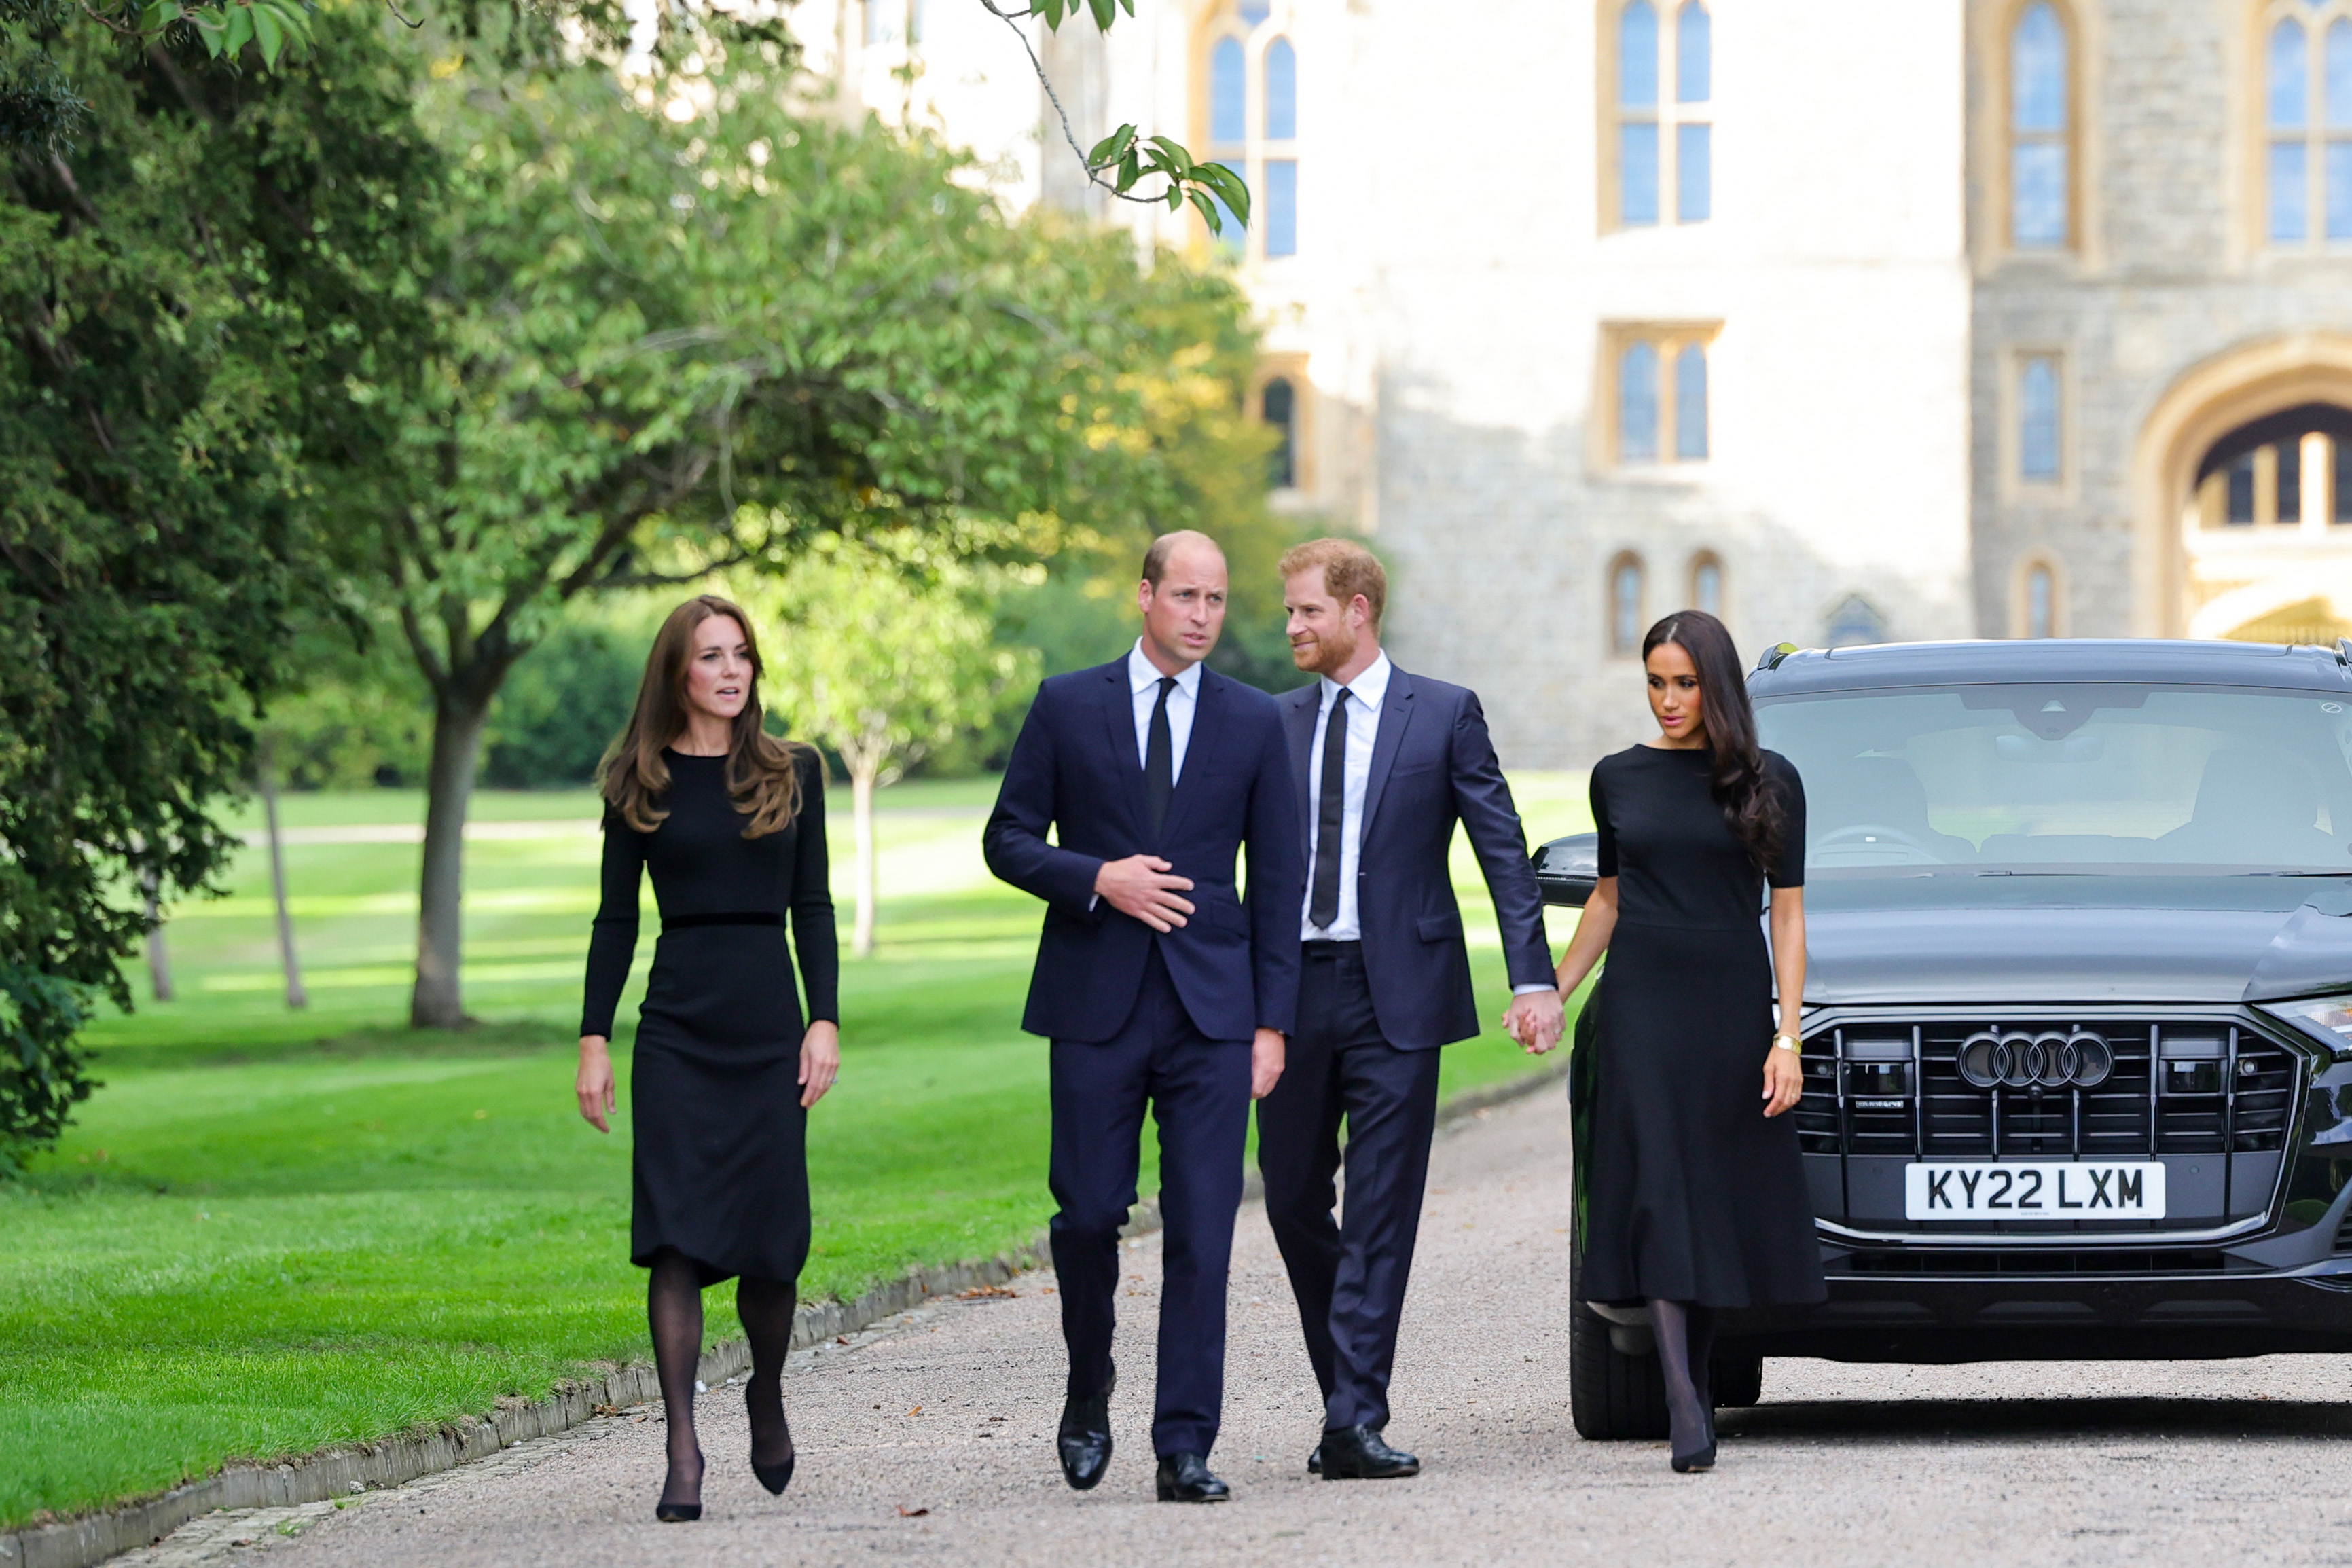 Kate Middleton, Prince William, Prince Harry, and Meghan Markle on the Long Walk at Windsor Castle